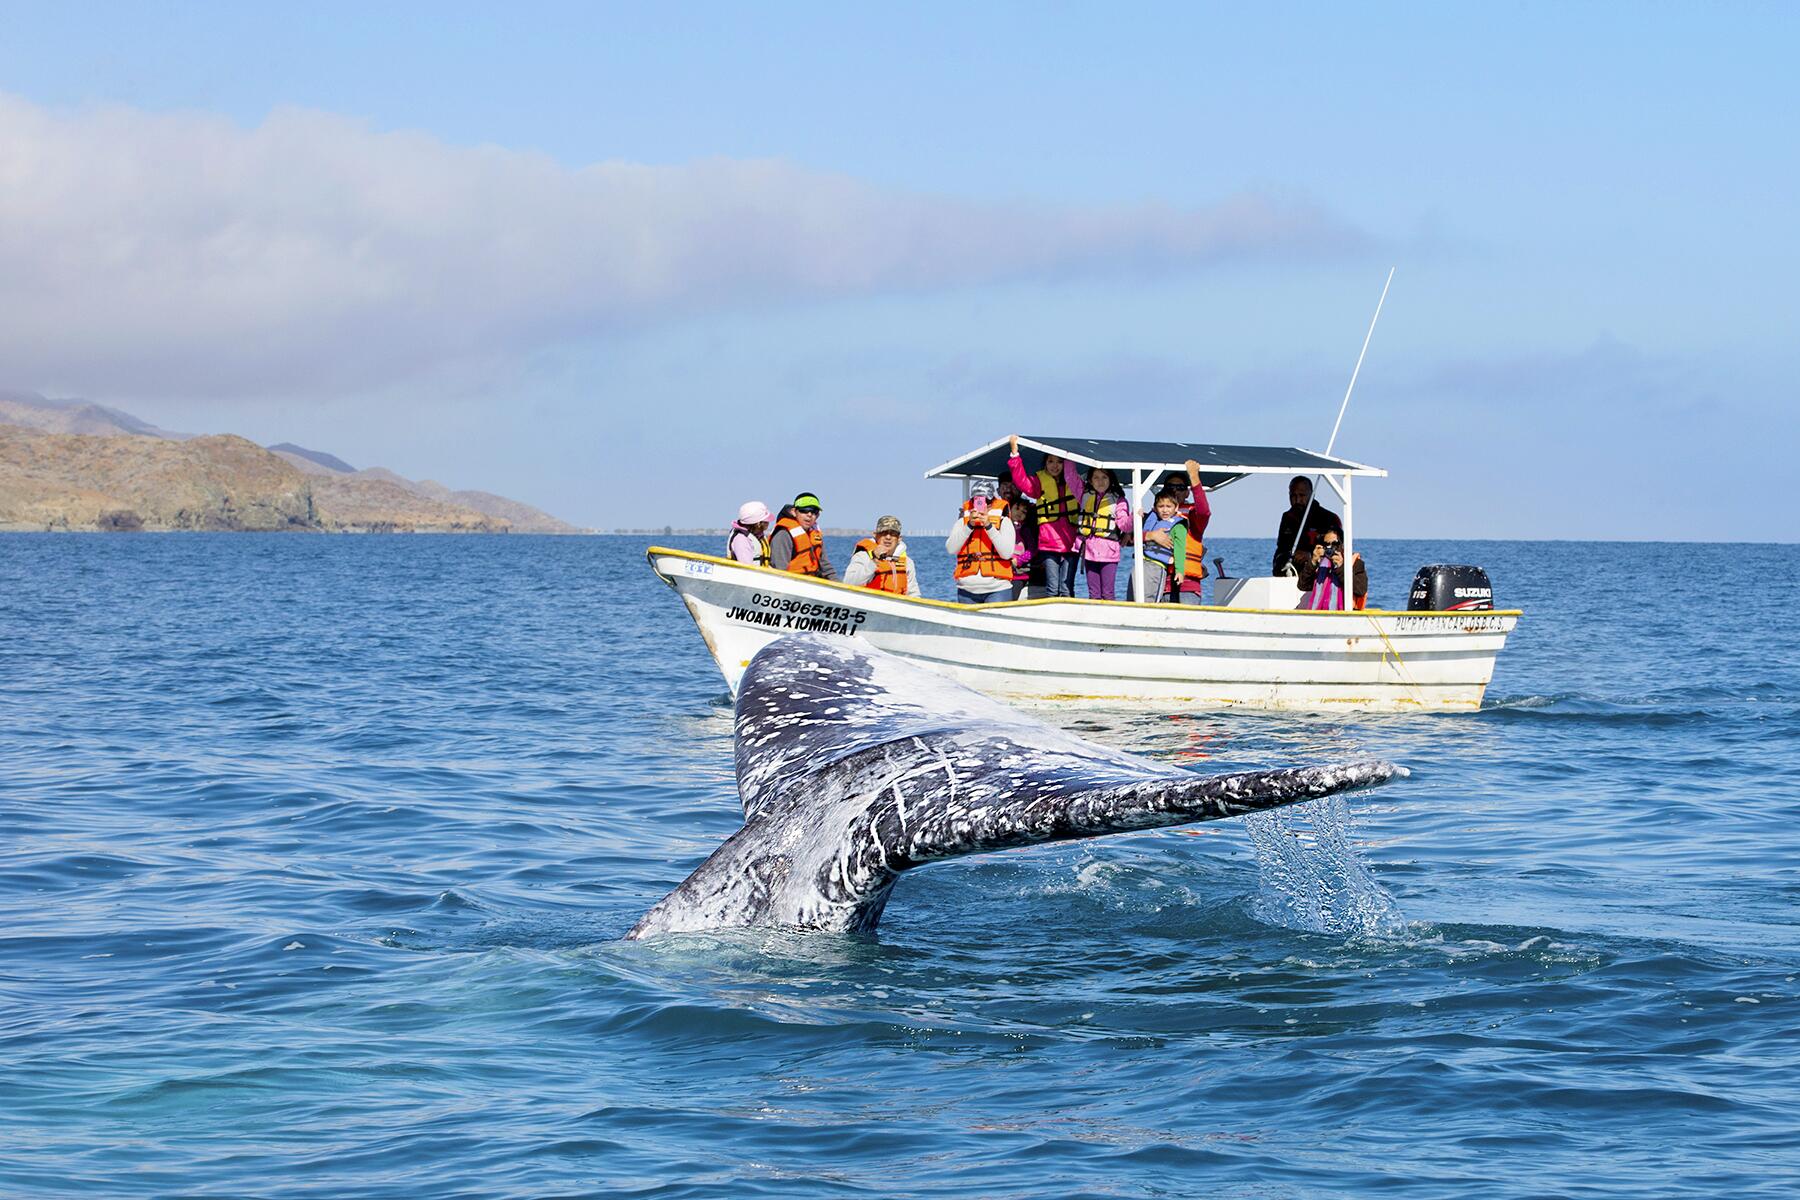 <a href='https://www.fodors.com/world/mexico-and-central-america/mexico/los-cabos/experiences/news/photos/best-outdoor-activities-and-things-to-do-in-los-cabos#'>From &quot;The 10 Best Outdoor Activities in Los Cabos: Spotting Majestic Whales From December to April&quot;</a>